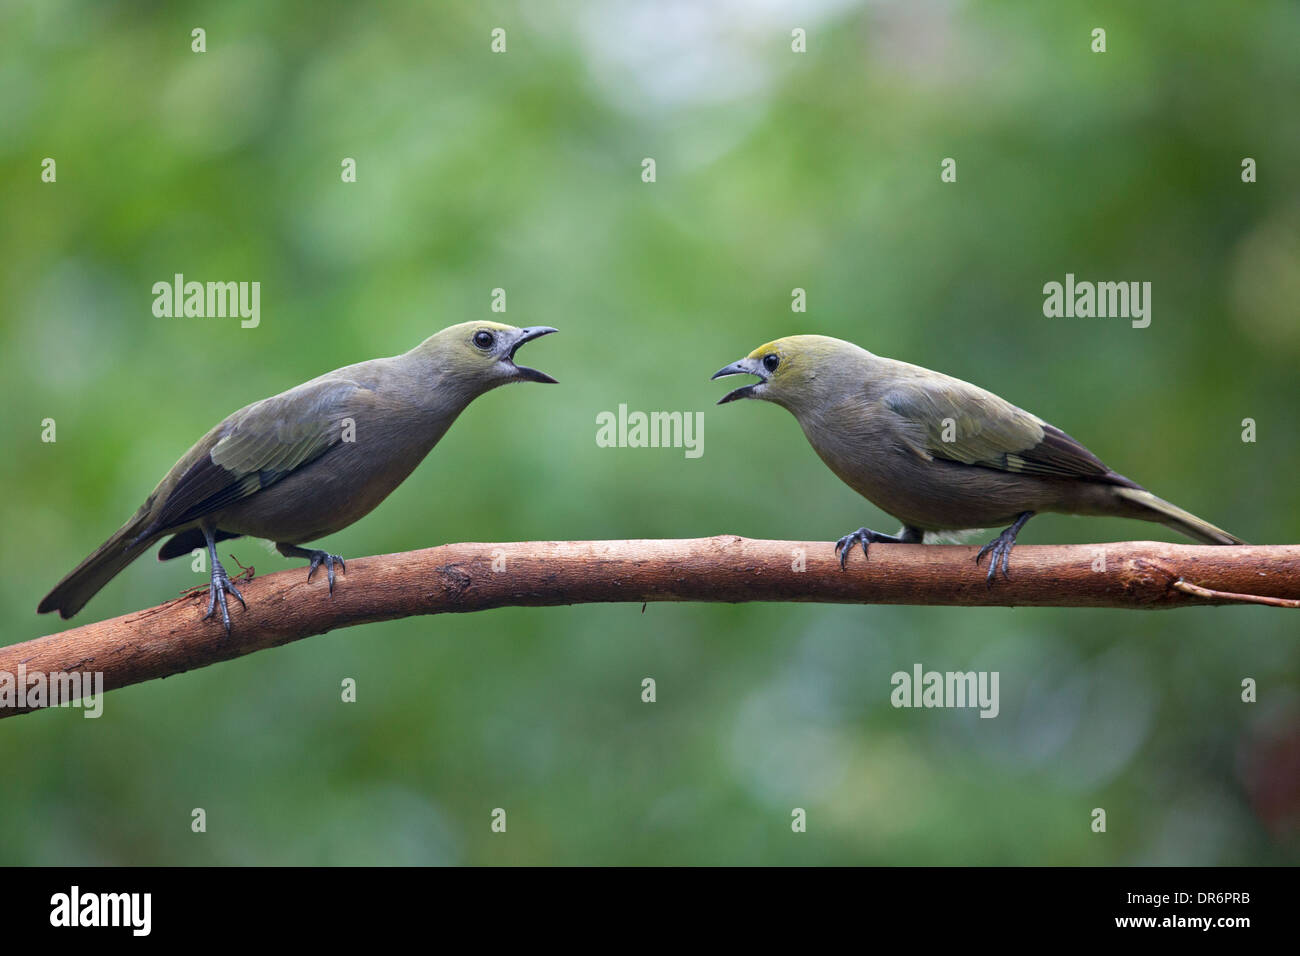 Palm Tanagers (Thraupis palmarum) fighting, perched on a branch in a Central American rainforest Stock Photo